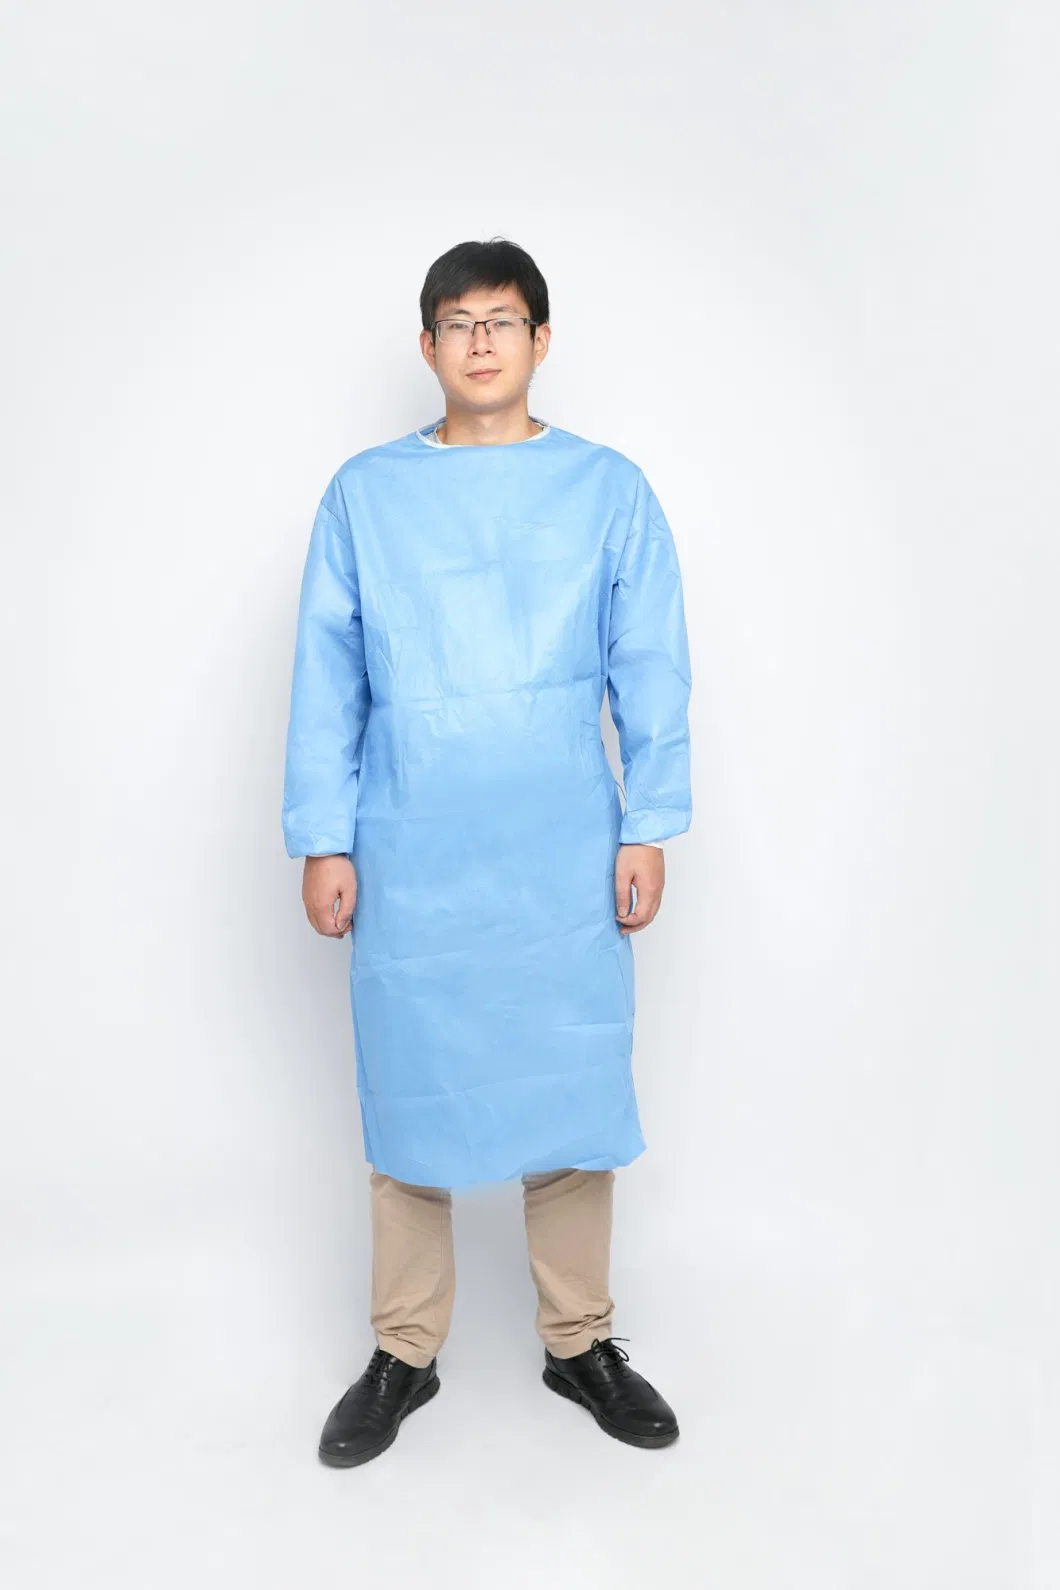 High Quality Medical Supplies Surgical Dress Standard Hospital Disposable Medical Surgical Isolation Gown/Coverall